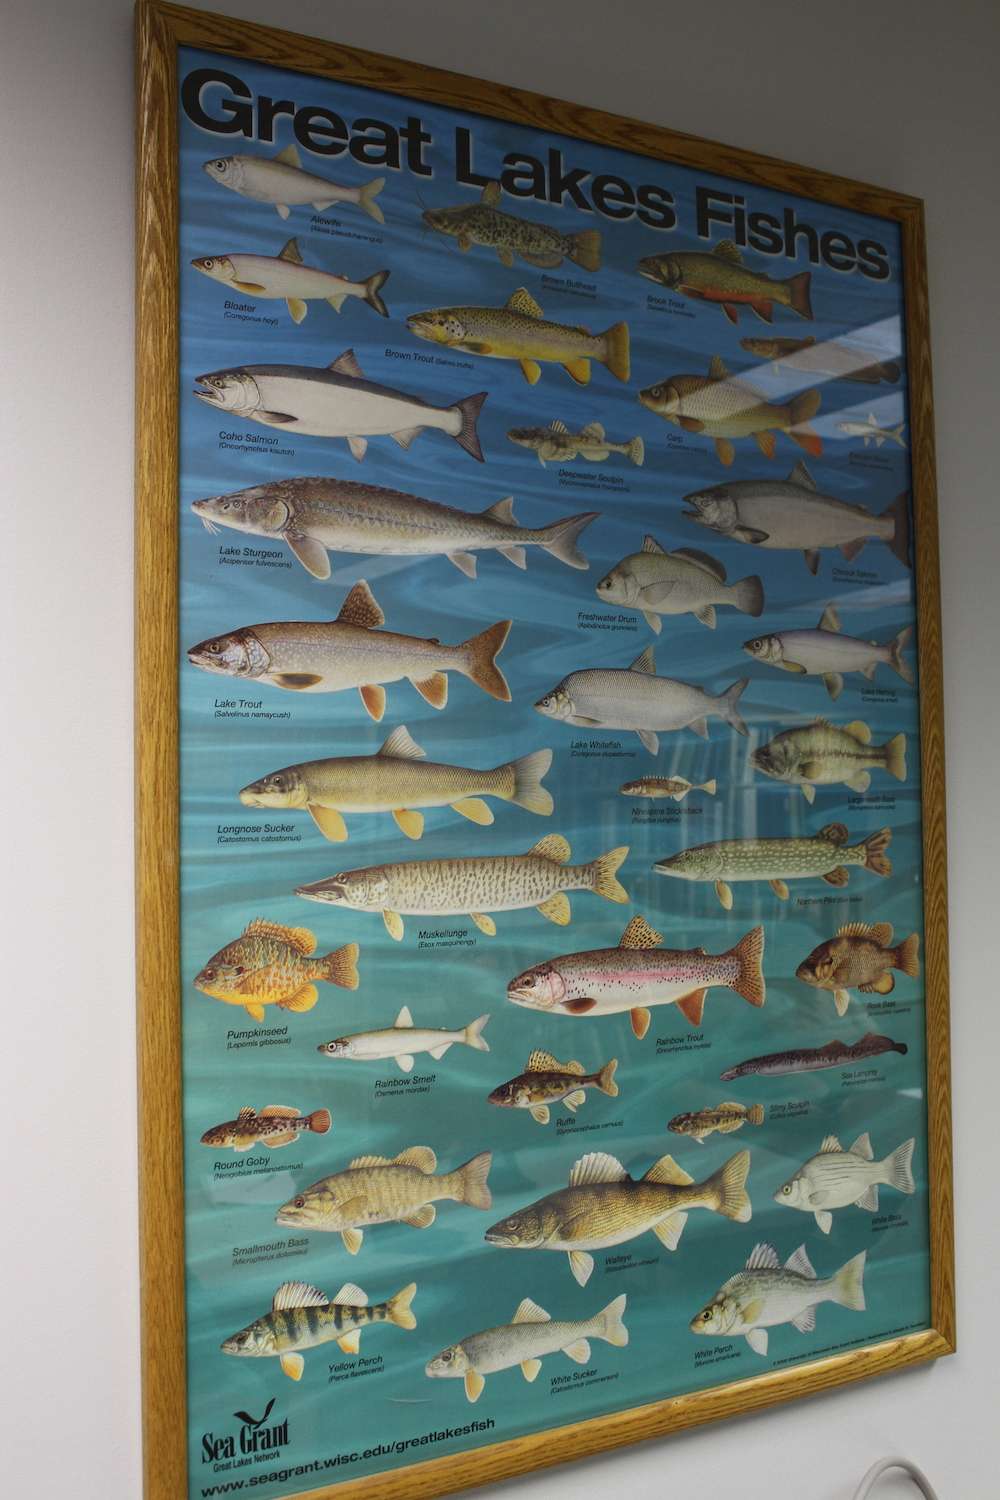 A poster on the wall shows the species that swim in Lake Erieâs waters.